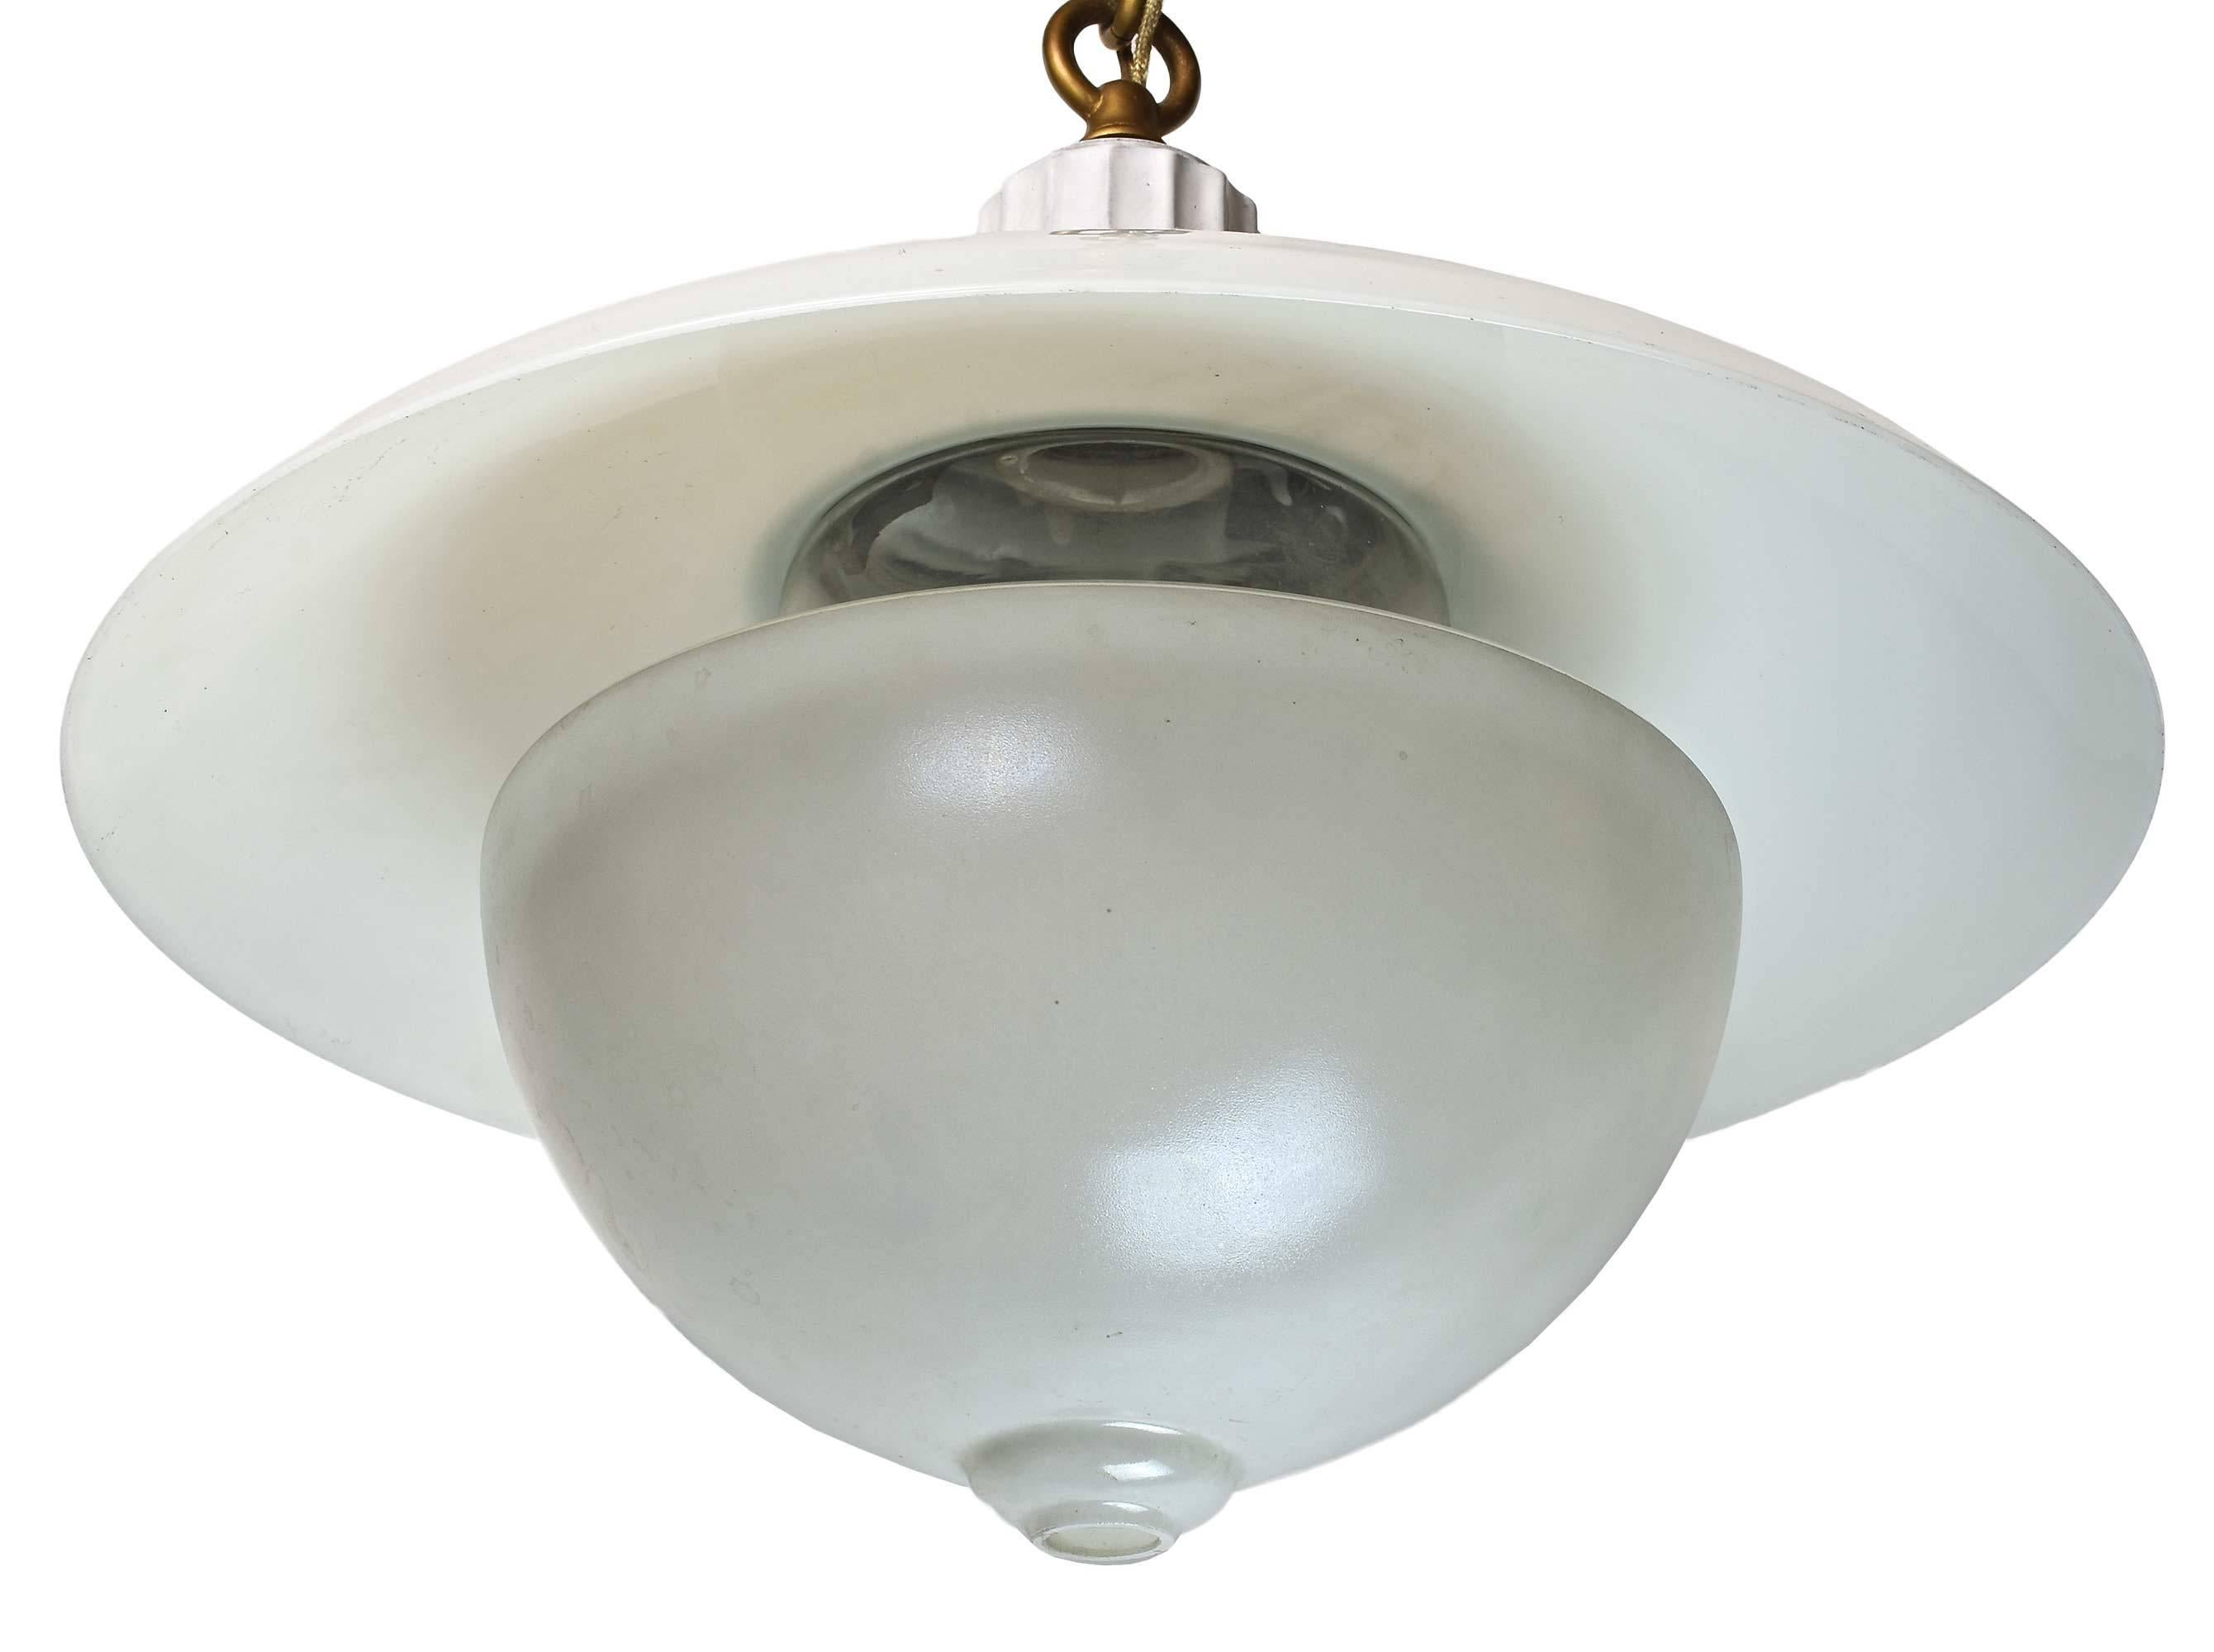 Industrial Early American 'Denzar' Two- Piece Shade and Enameled Fixture by Beardslee